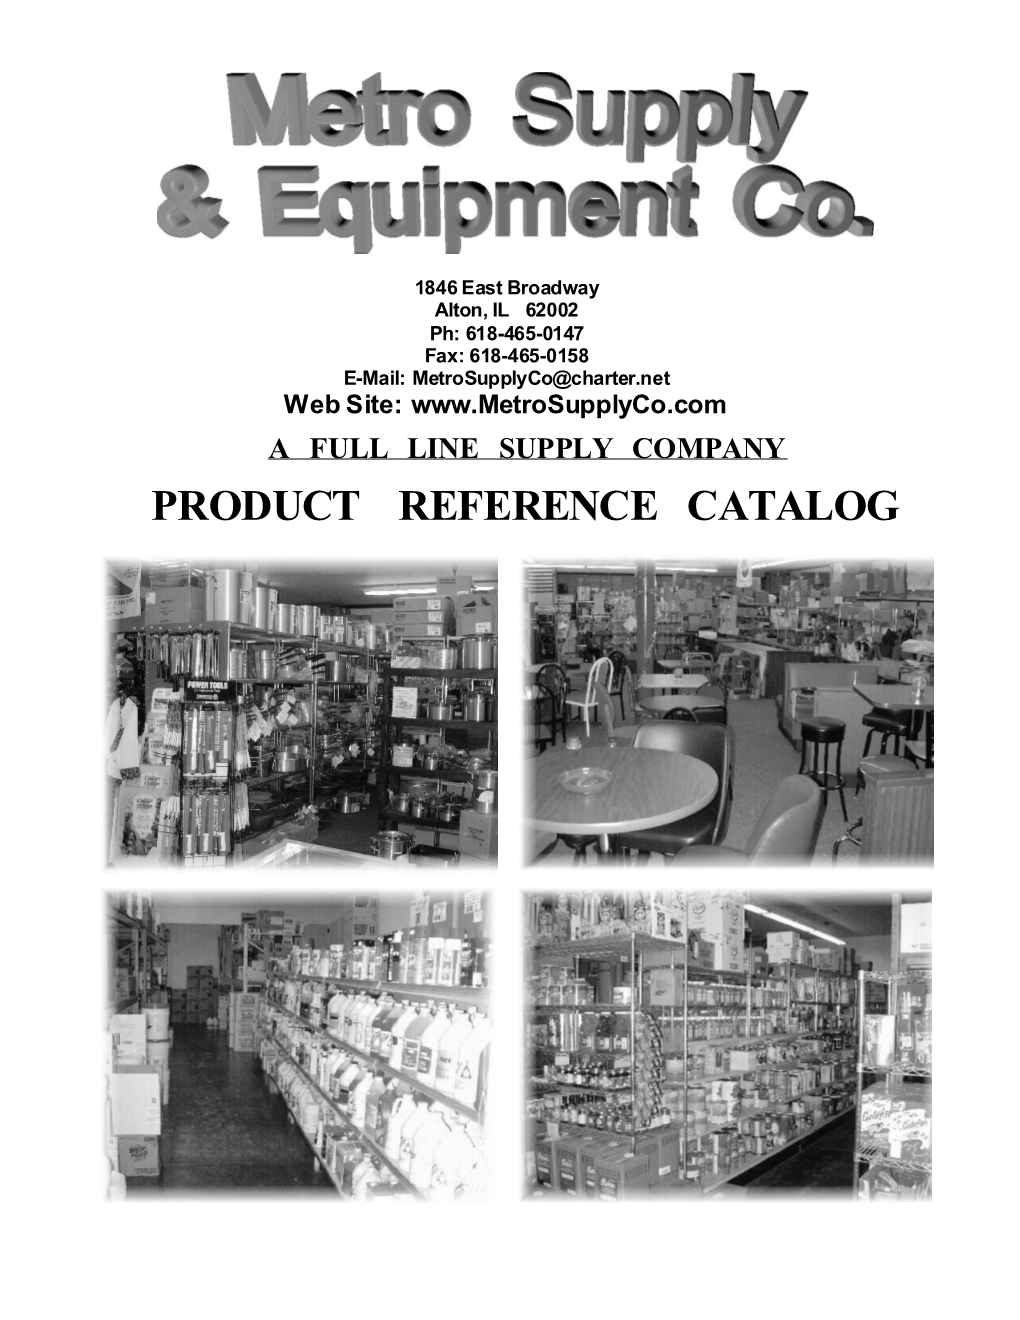 PRODUCT REFERENCE CATALOG FREE DELIVERY We Deliver Free to Designated Metropolitan Areas